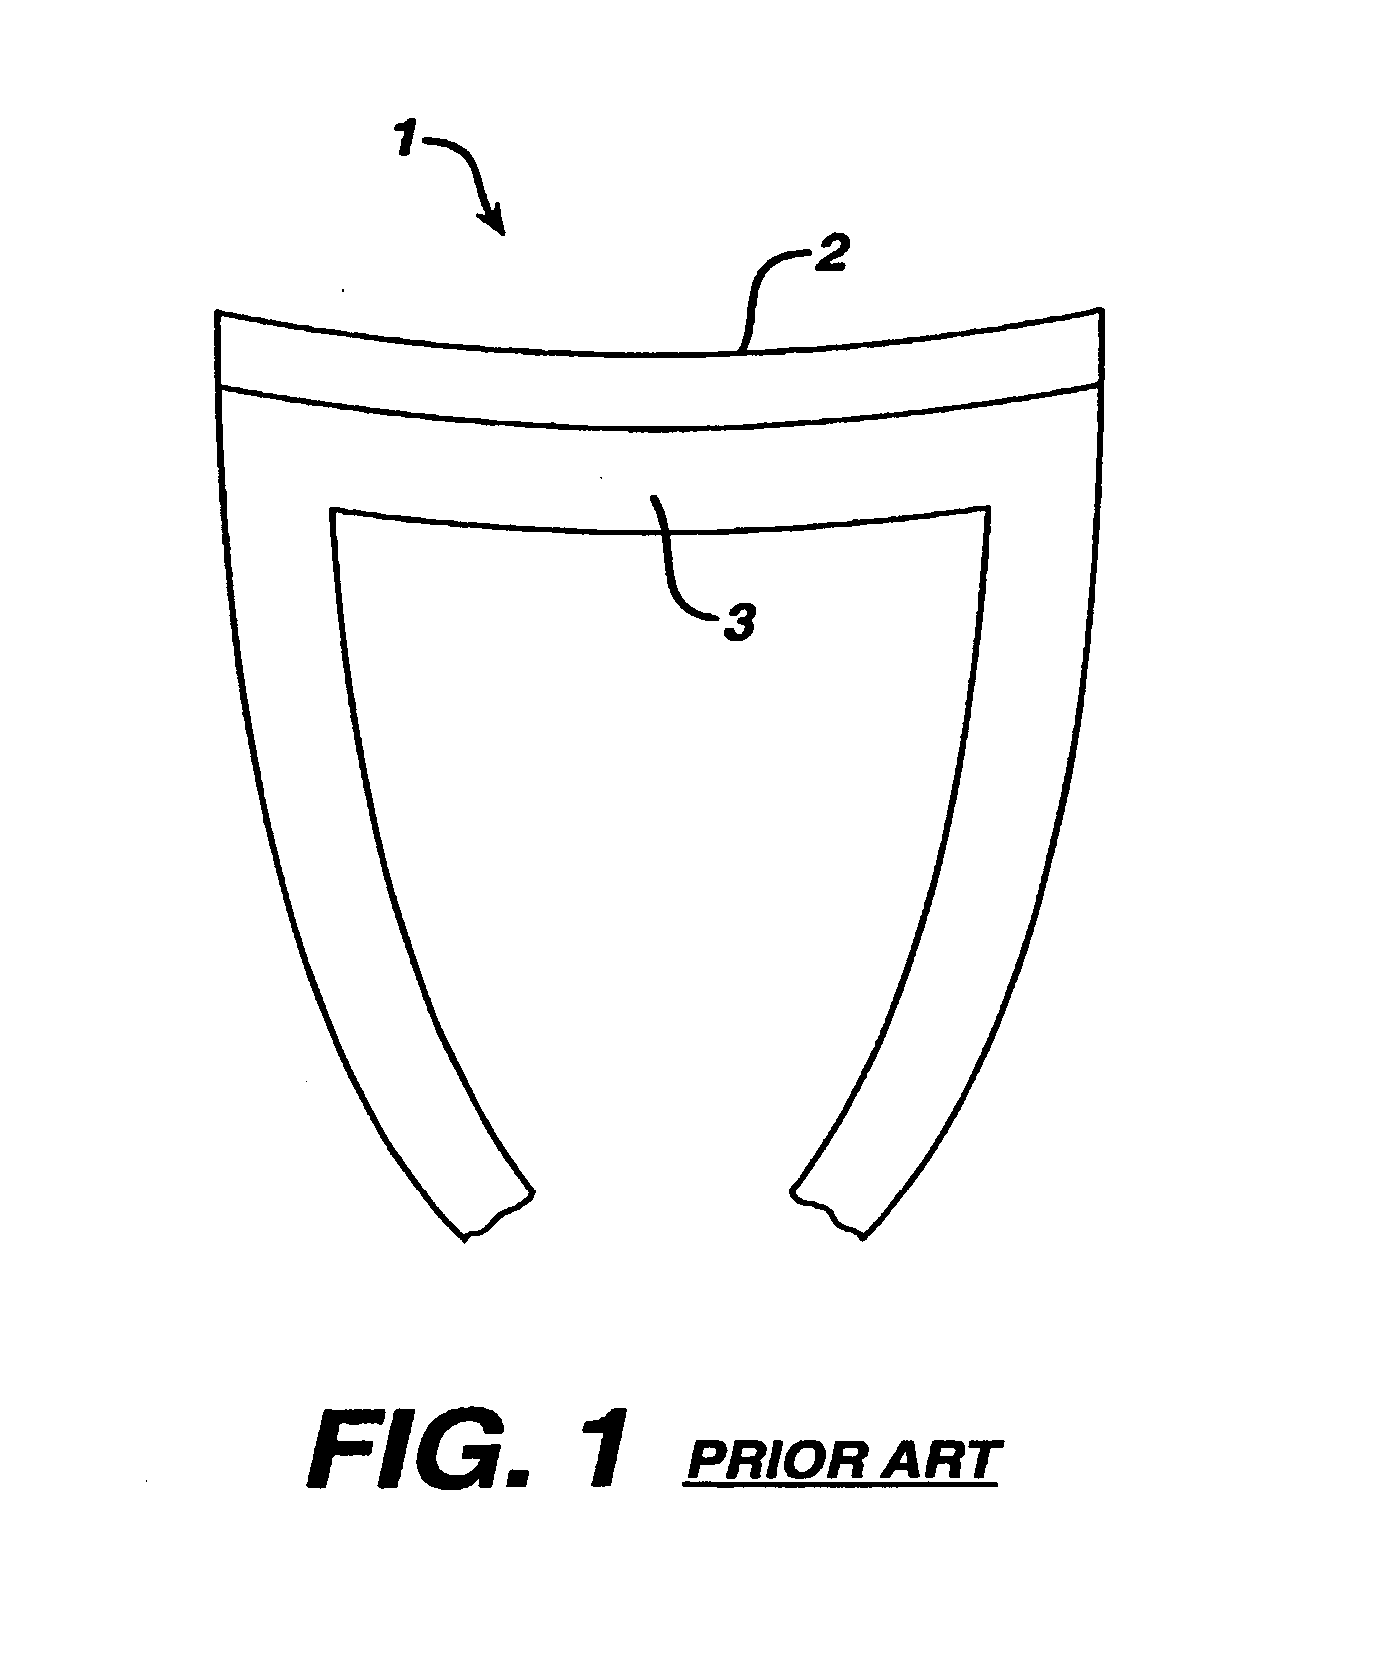 Tamp for concave resurfacing prosthesis